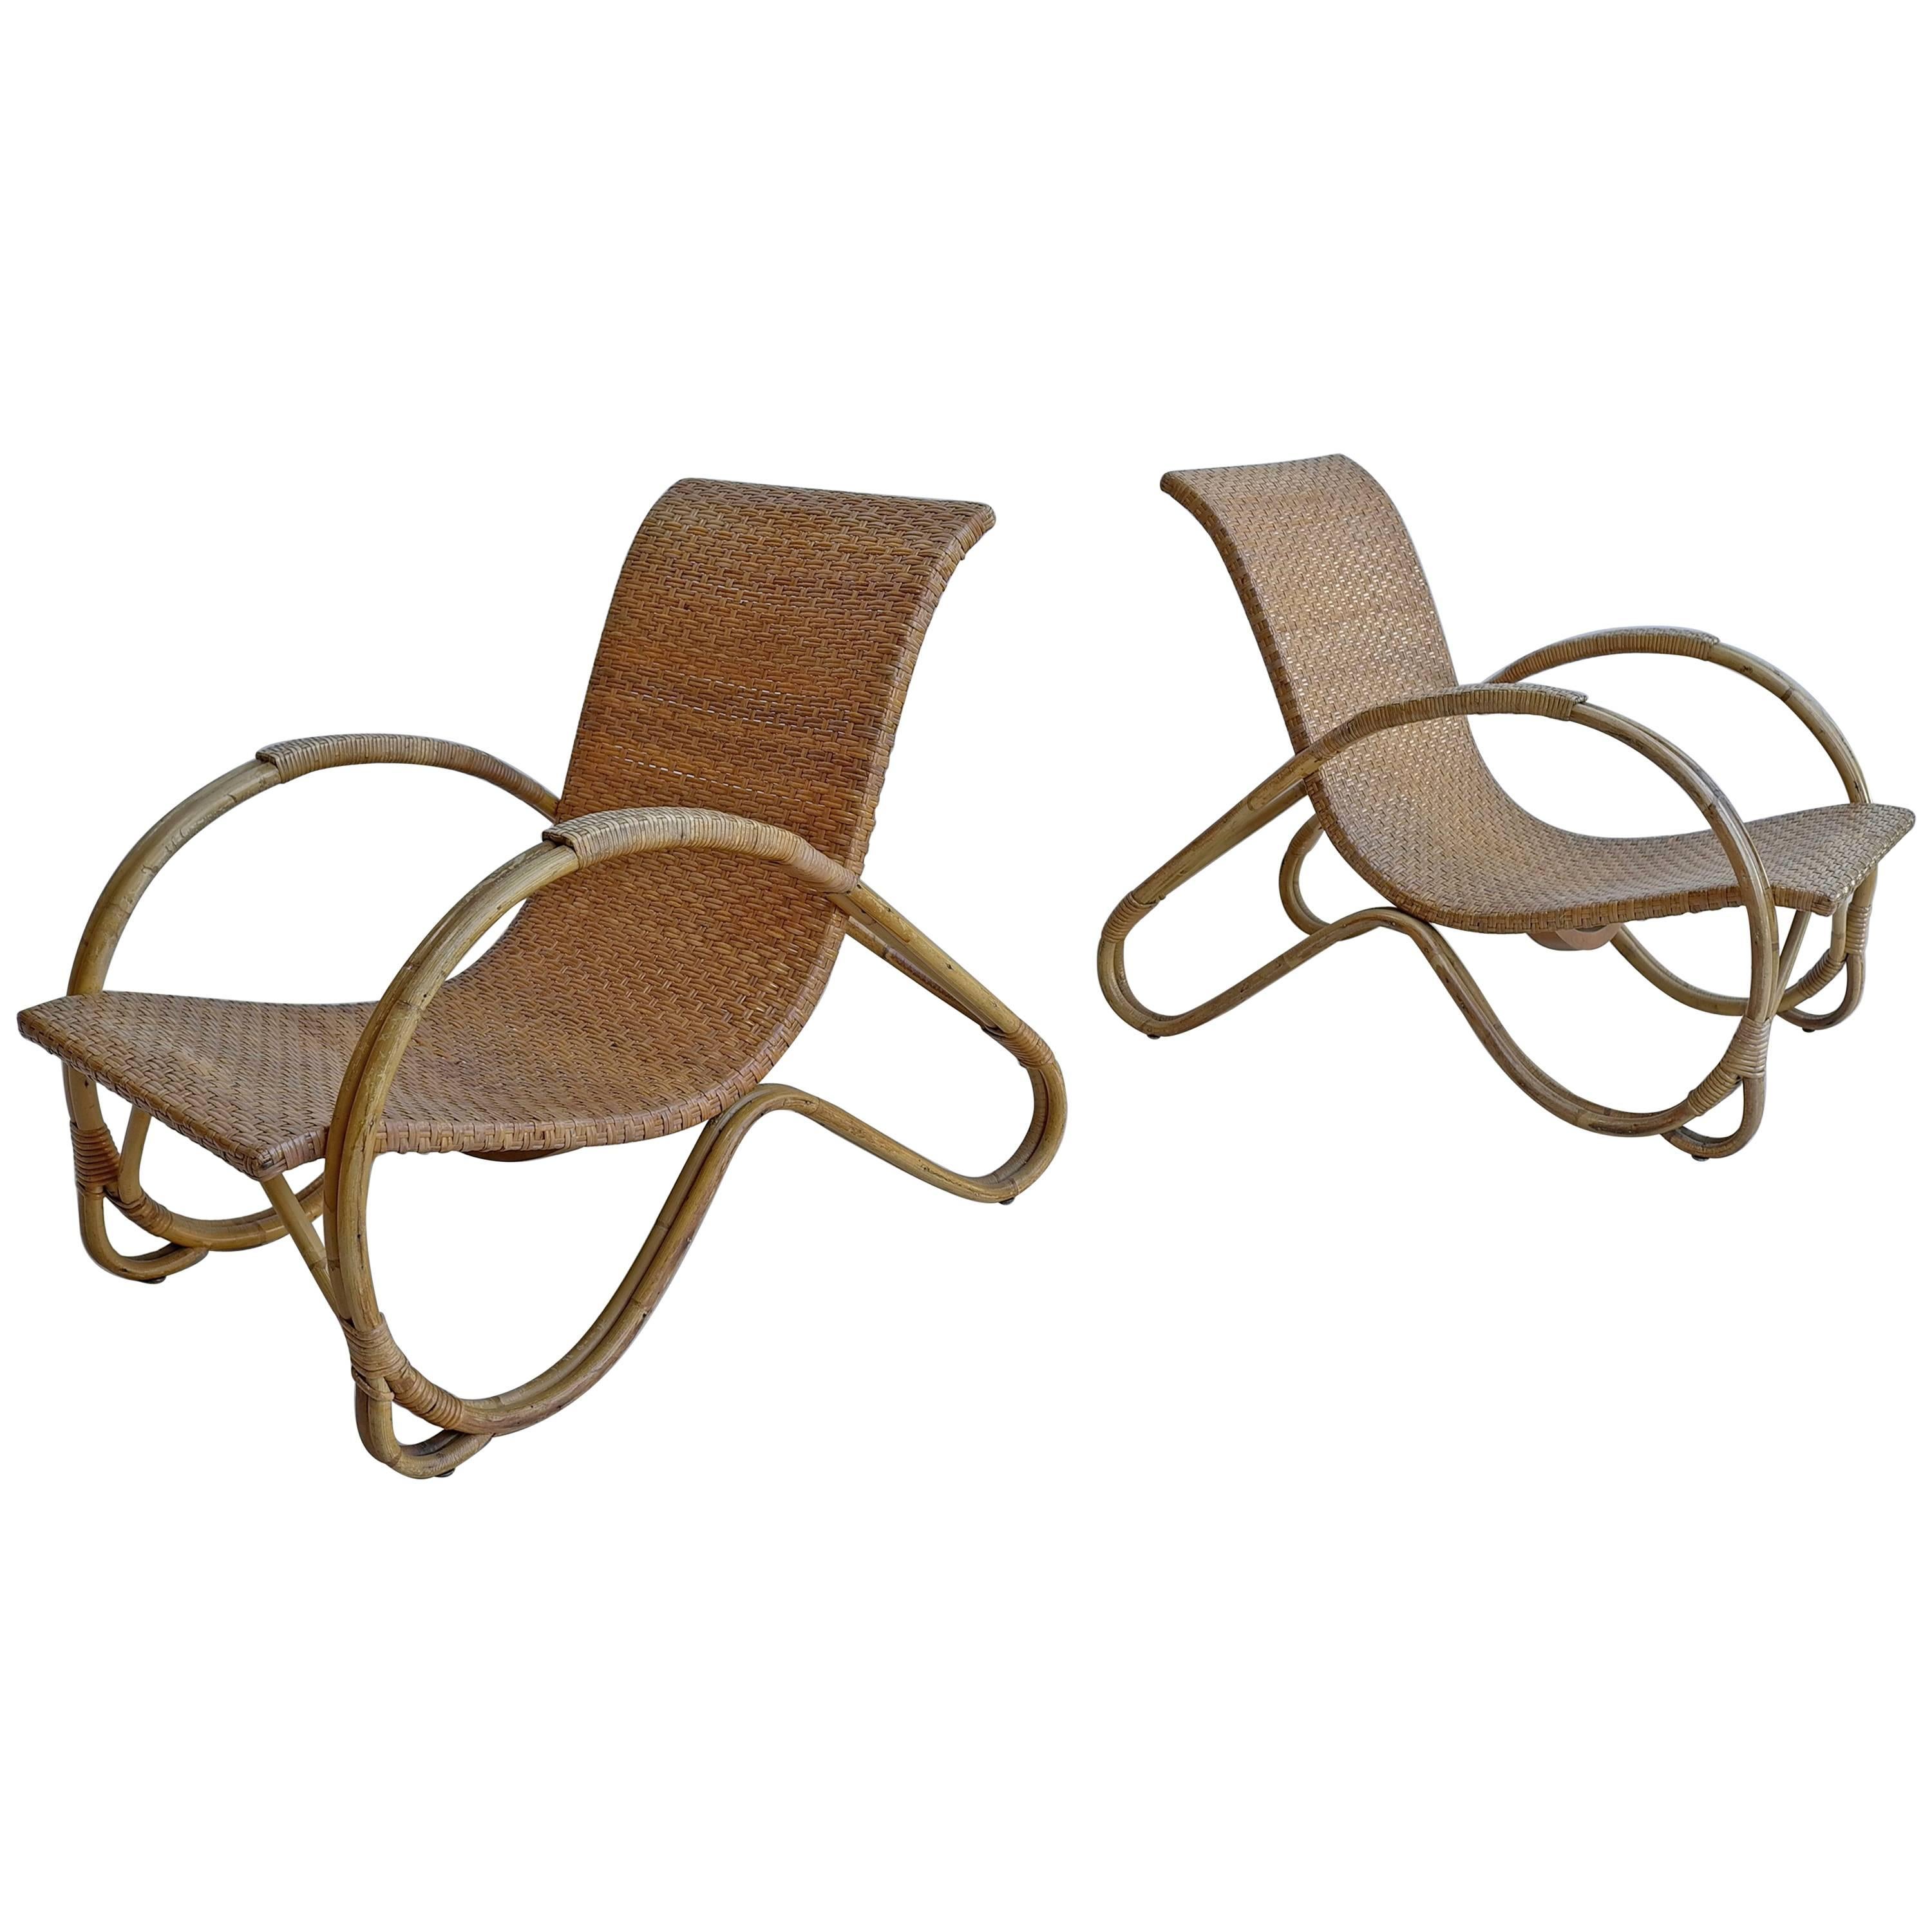 Pair of Mid-Century monumental woven armchairs in rattan.